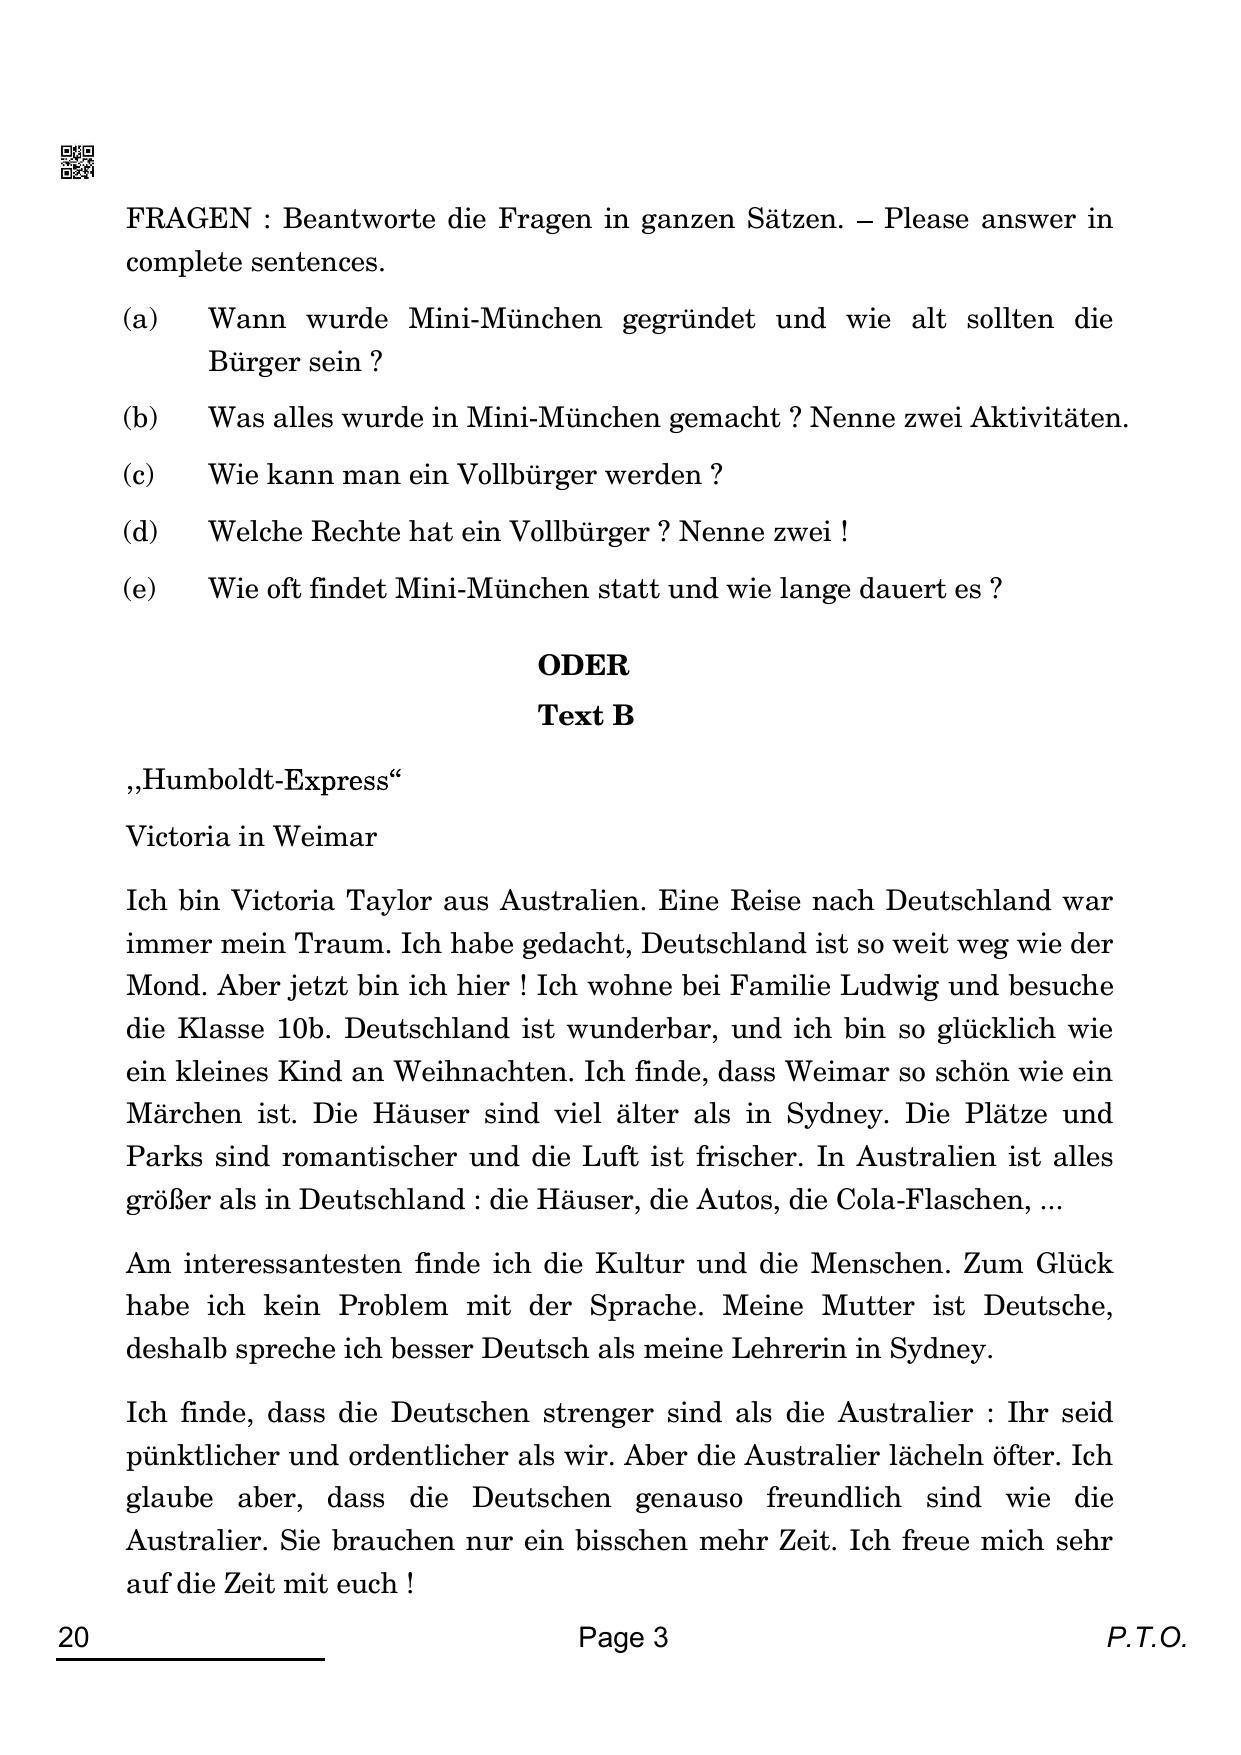 CBSE Class 12 20_German 2022 Question Paper - Page 3